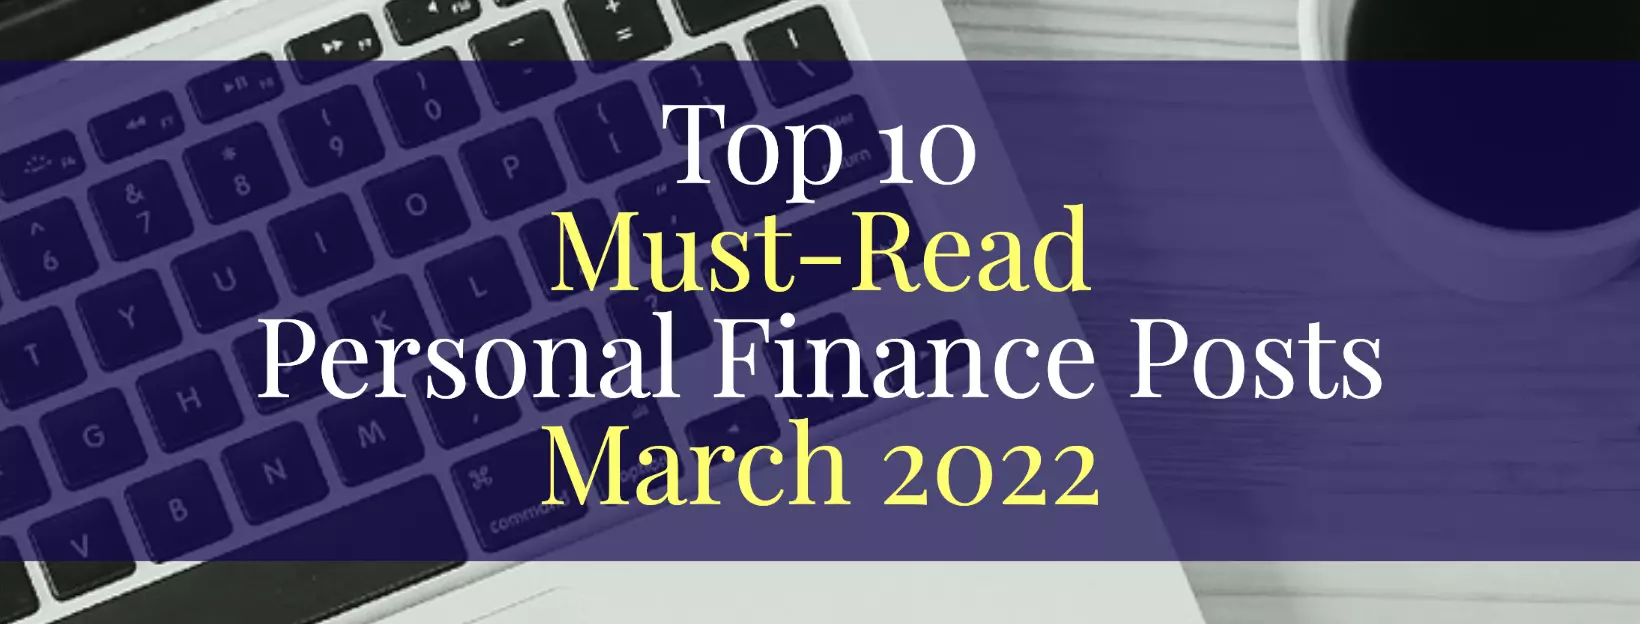 Top 10 Must-Read Personal Finance Posts March 2022